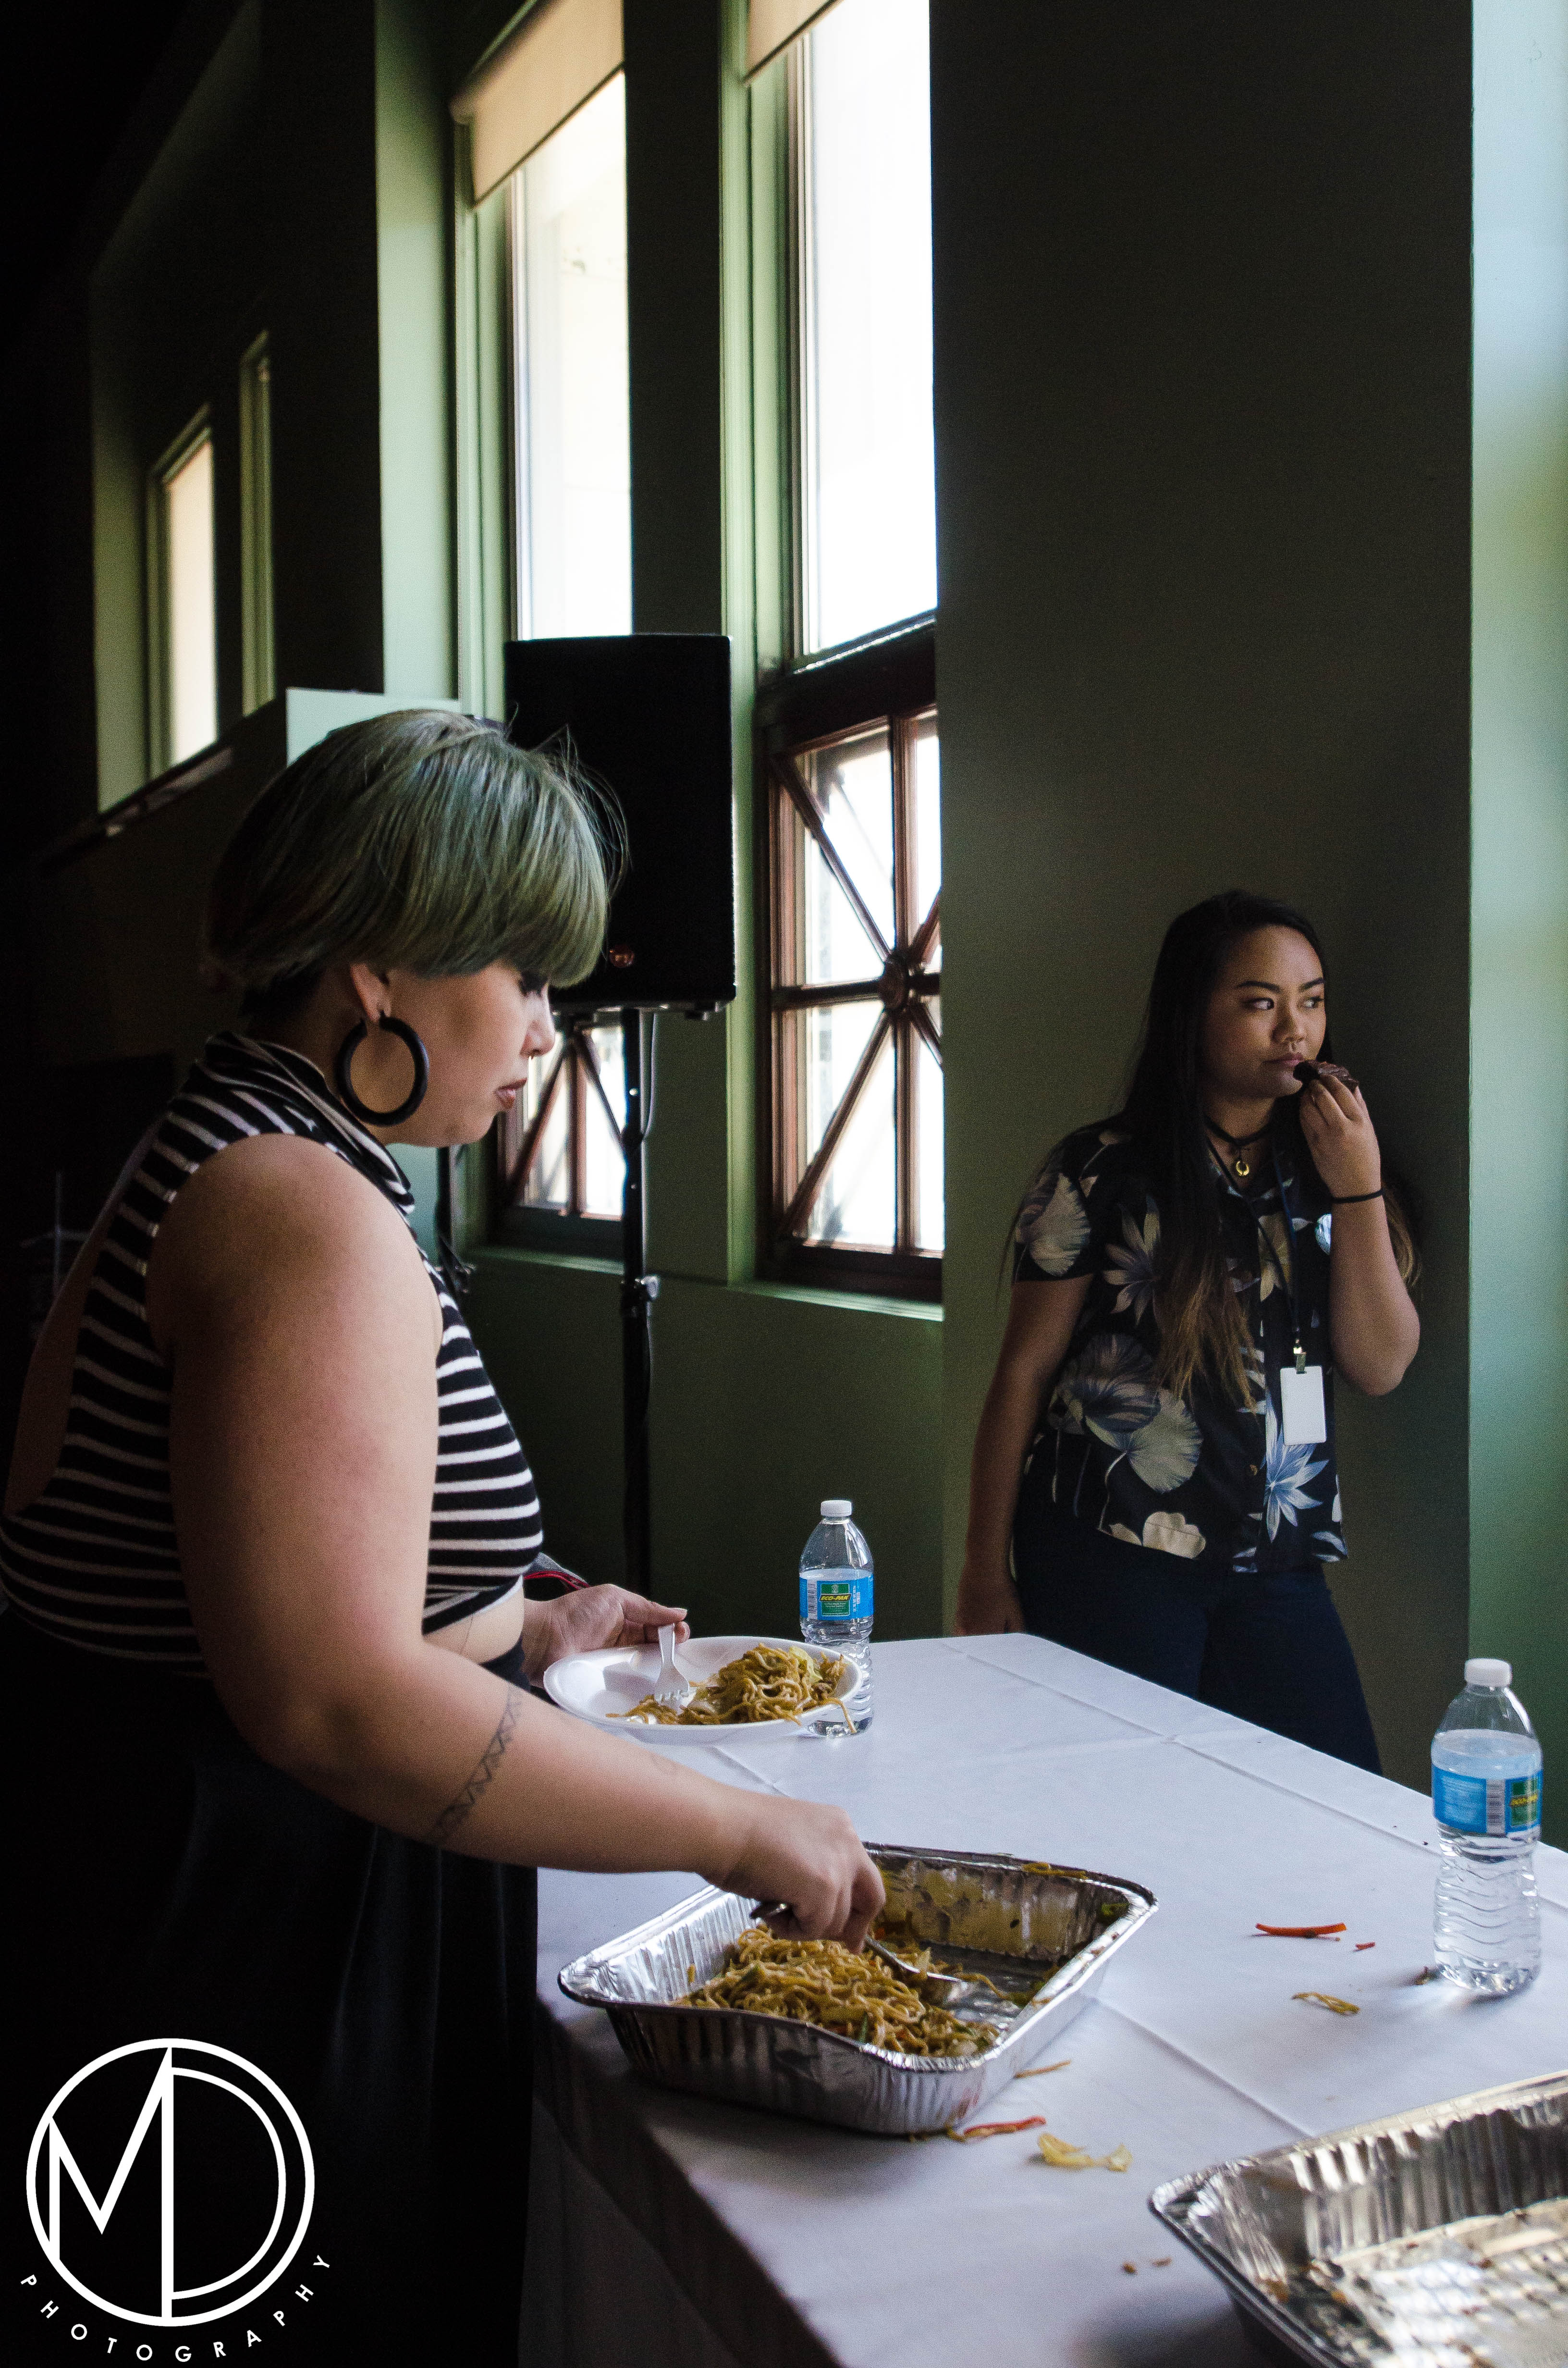 Avigail Bautista at the food table. (c) Field Museum of Natural History - CC BY-NC 4.0